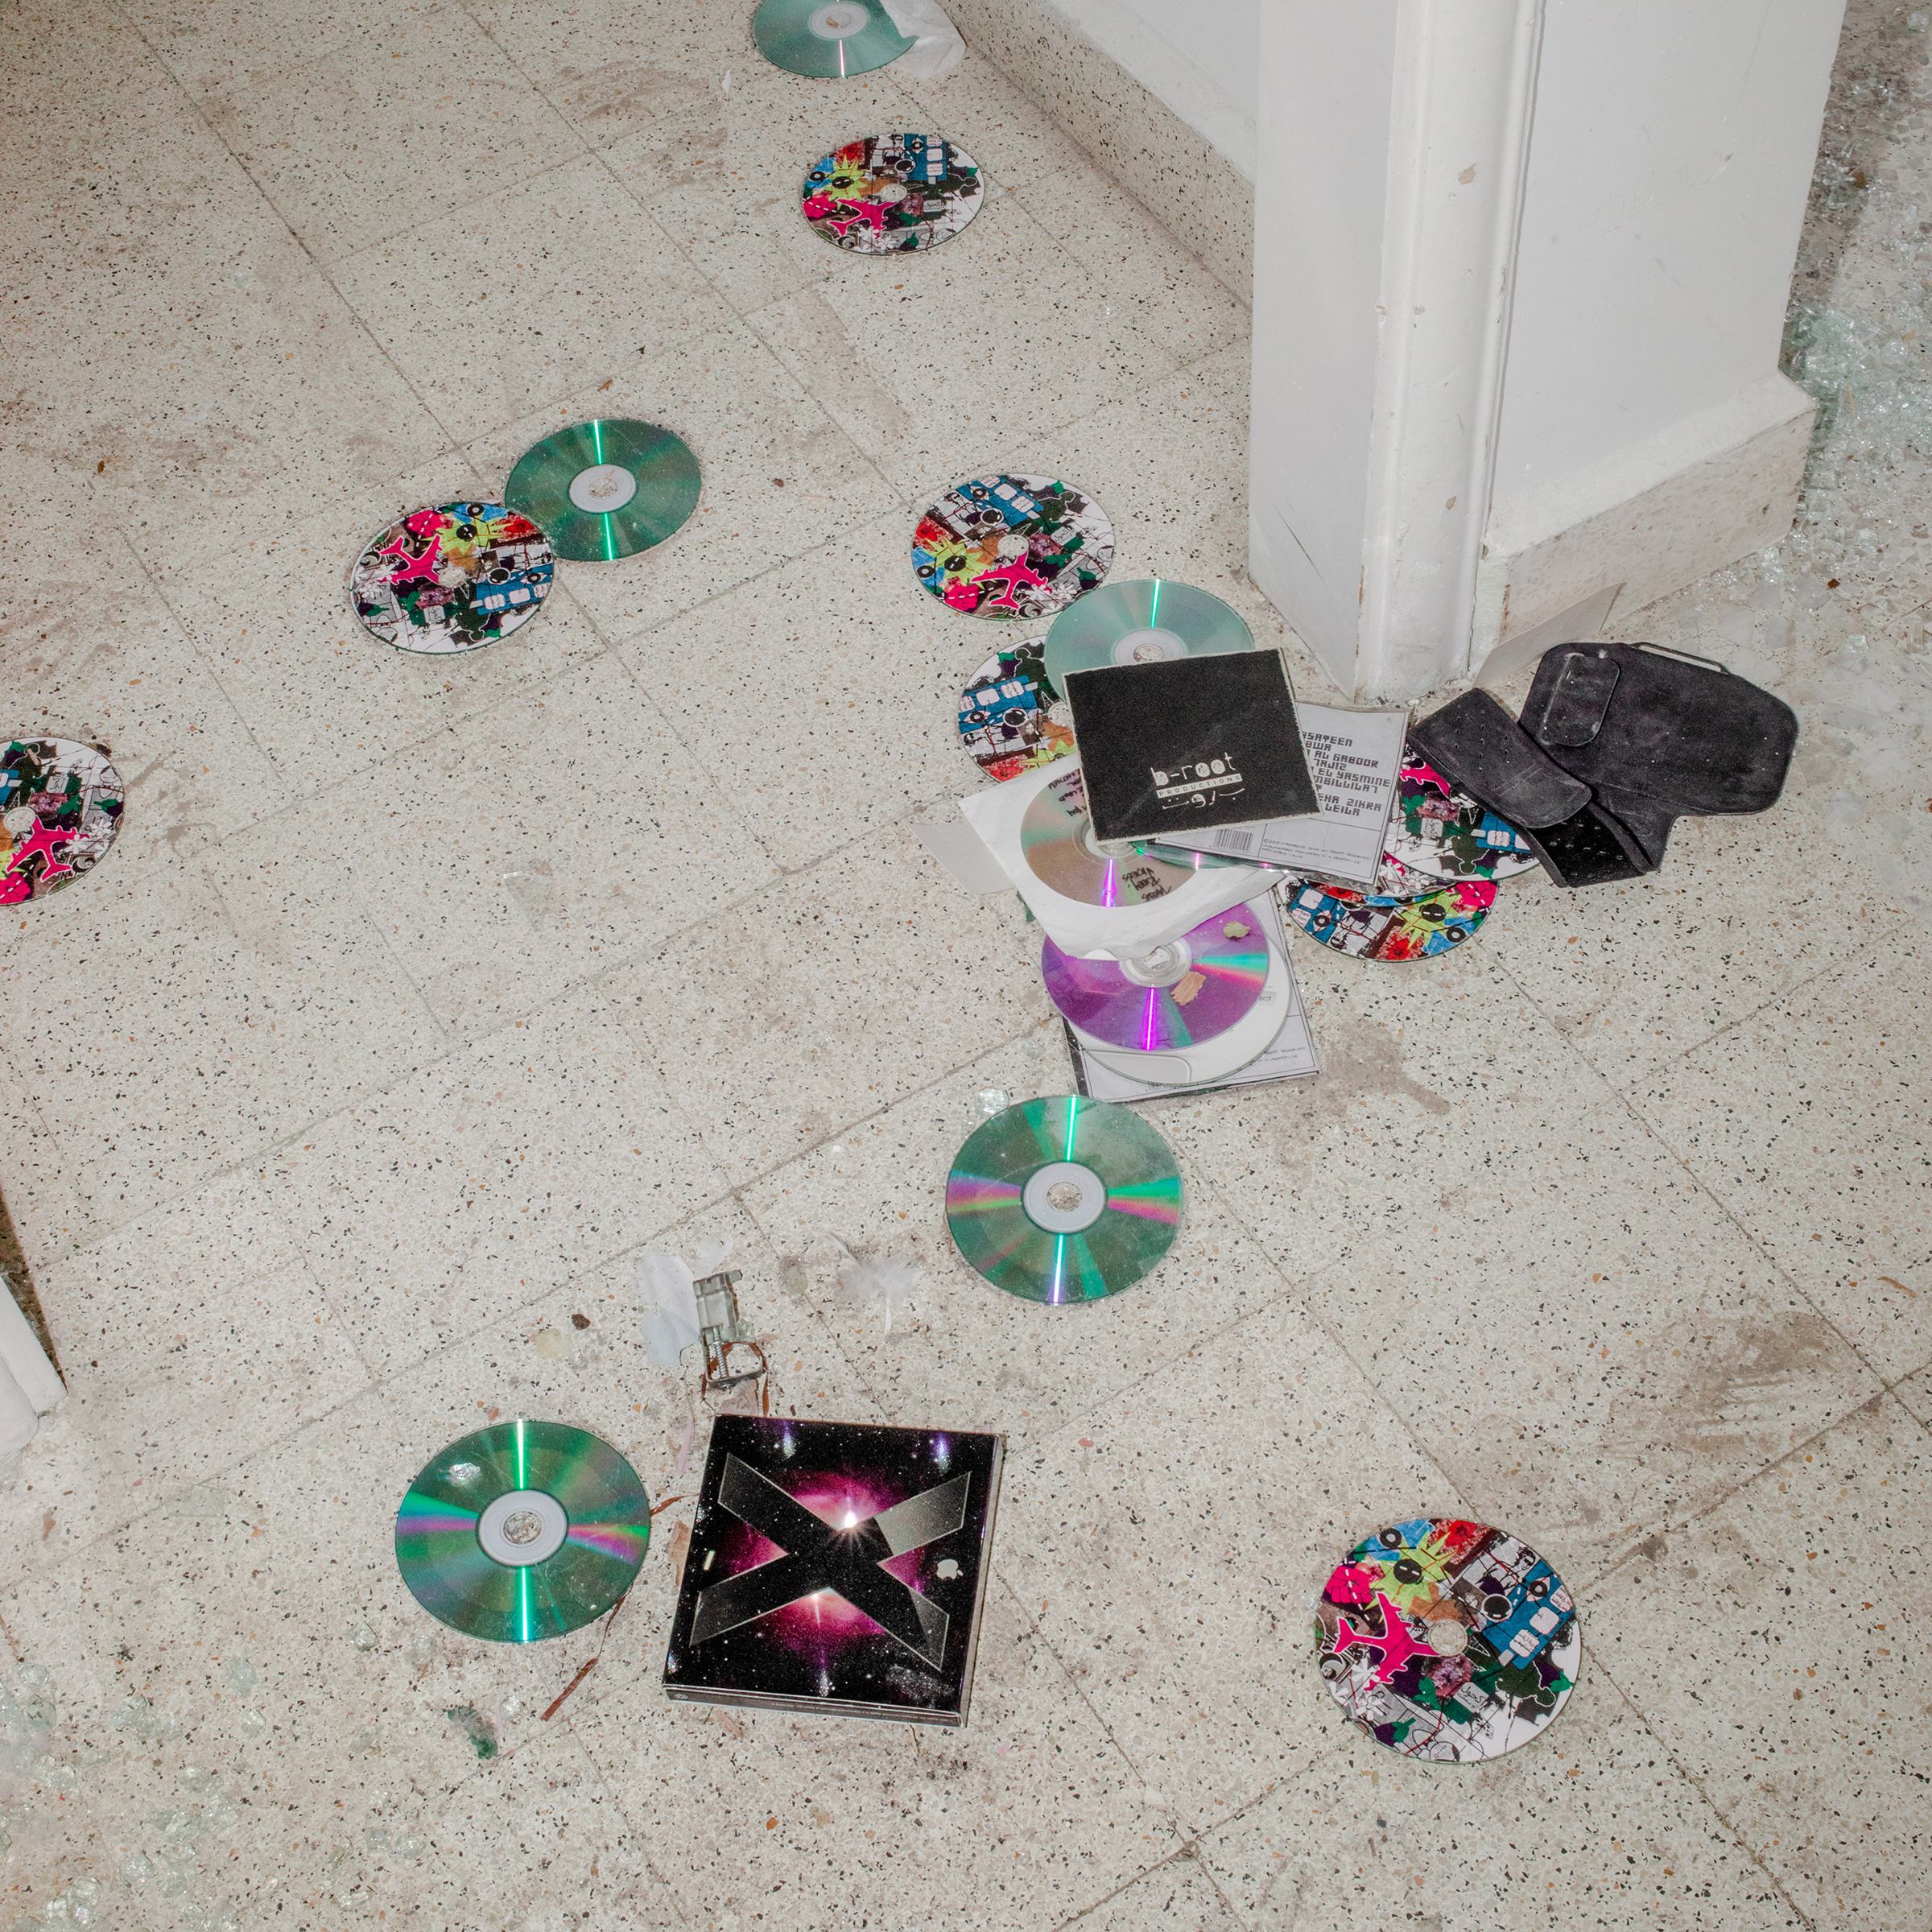 CDs are scattered on the floor of music producer Jana Saleh's apartment, which was heavily damaged by the port explosion and blast wave. "I Google-mapped the distance between the blast and my home. It’s approximately two kilometers (1.24 mi.). We managed to hide in the glassless bathroom right on time and survived it," says Saleh. "The concept is a thing of the 80s, during the civil war. The kids and the valuables were hidden in the bathroom. My brother and I spent a lot of time in it. On Aug. 4, I dragged my girlfriend to it. She’s the valuable in this story."